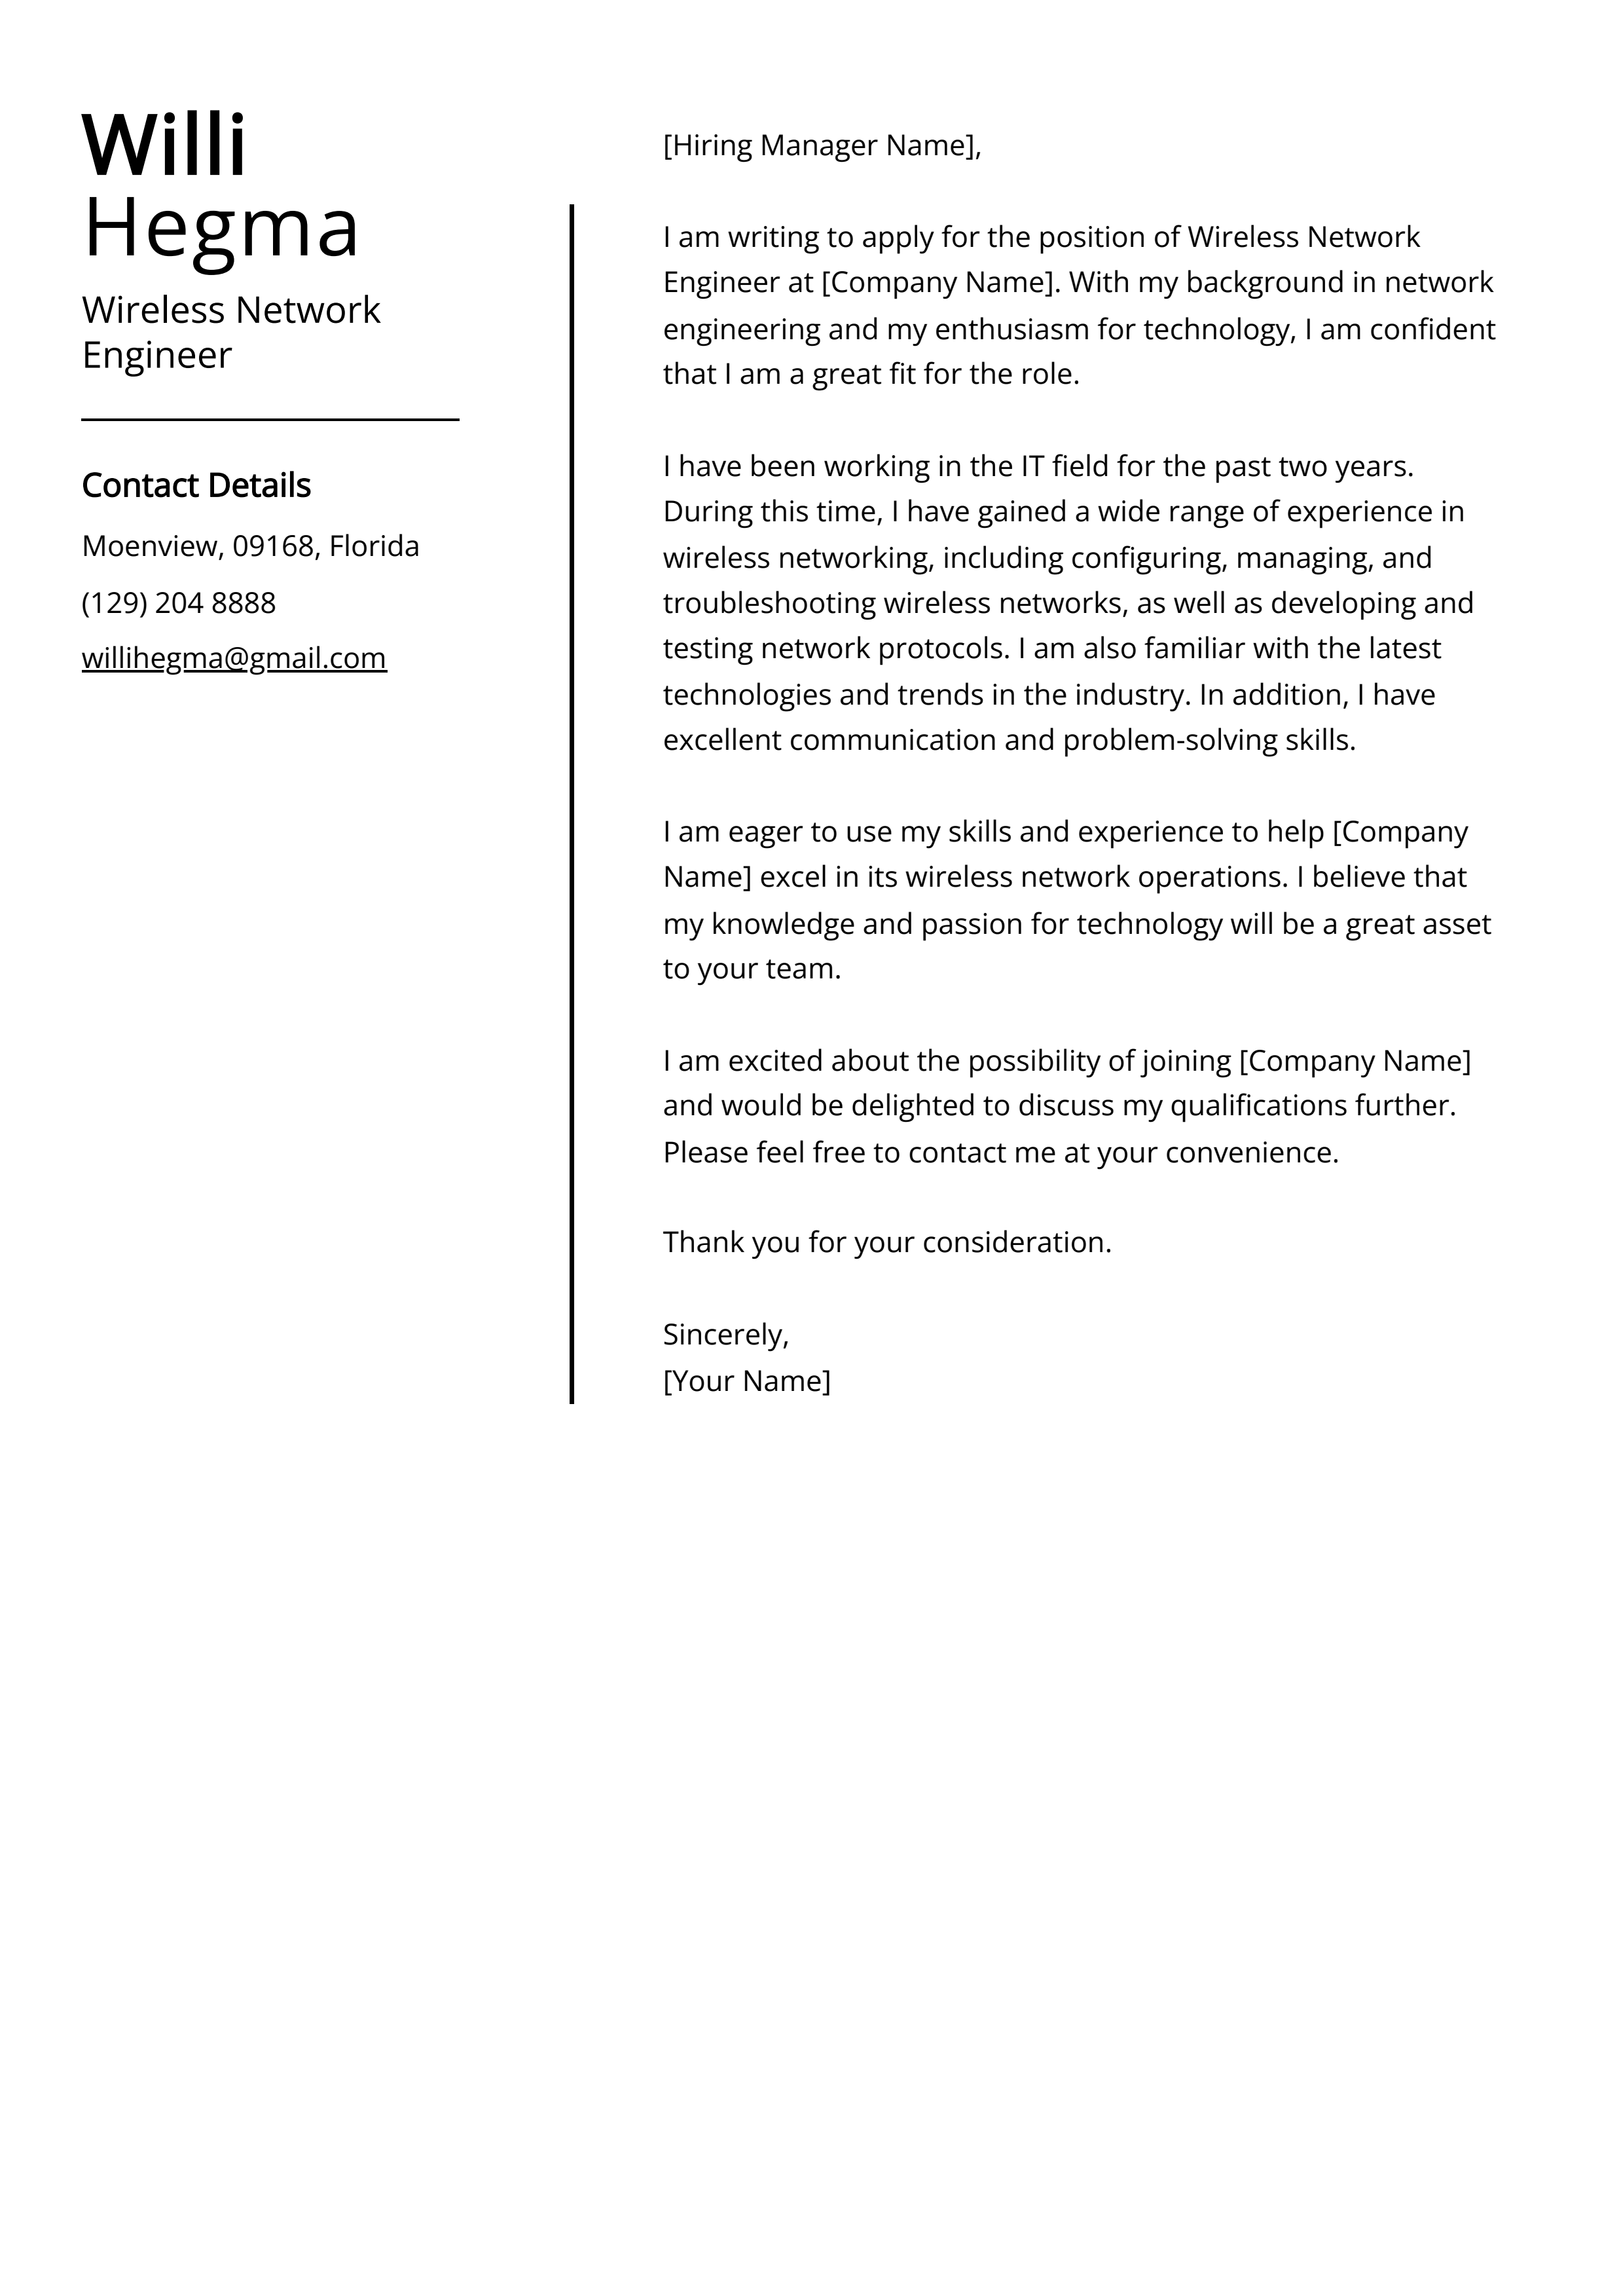 Wireless Network Engineer Cover Letter Example